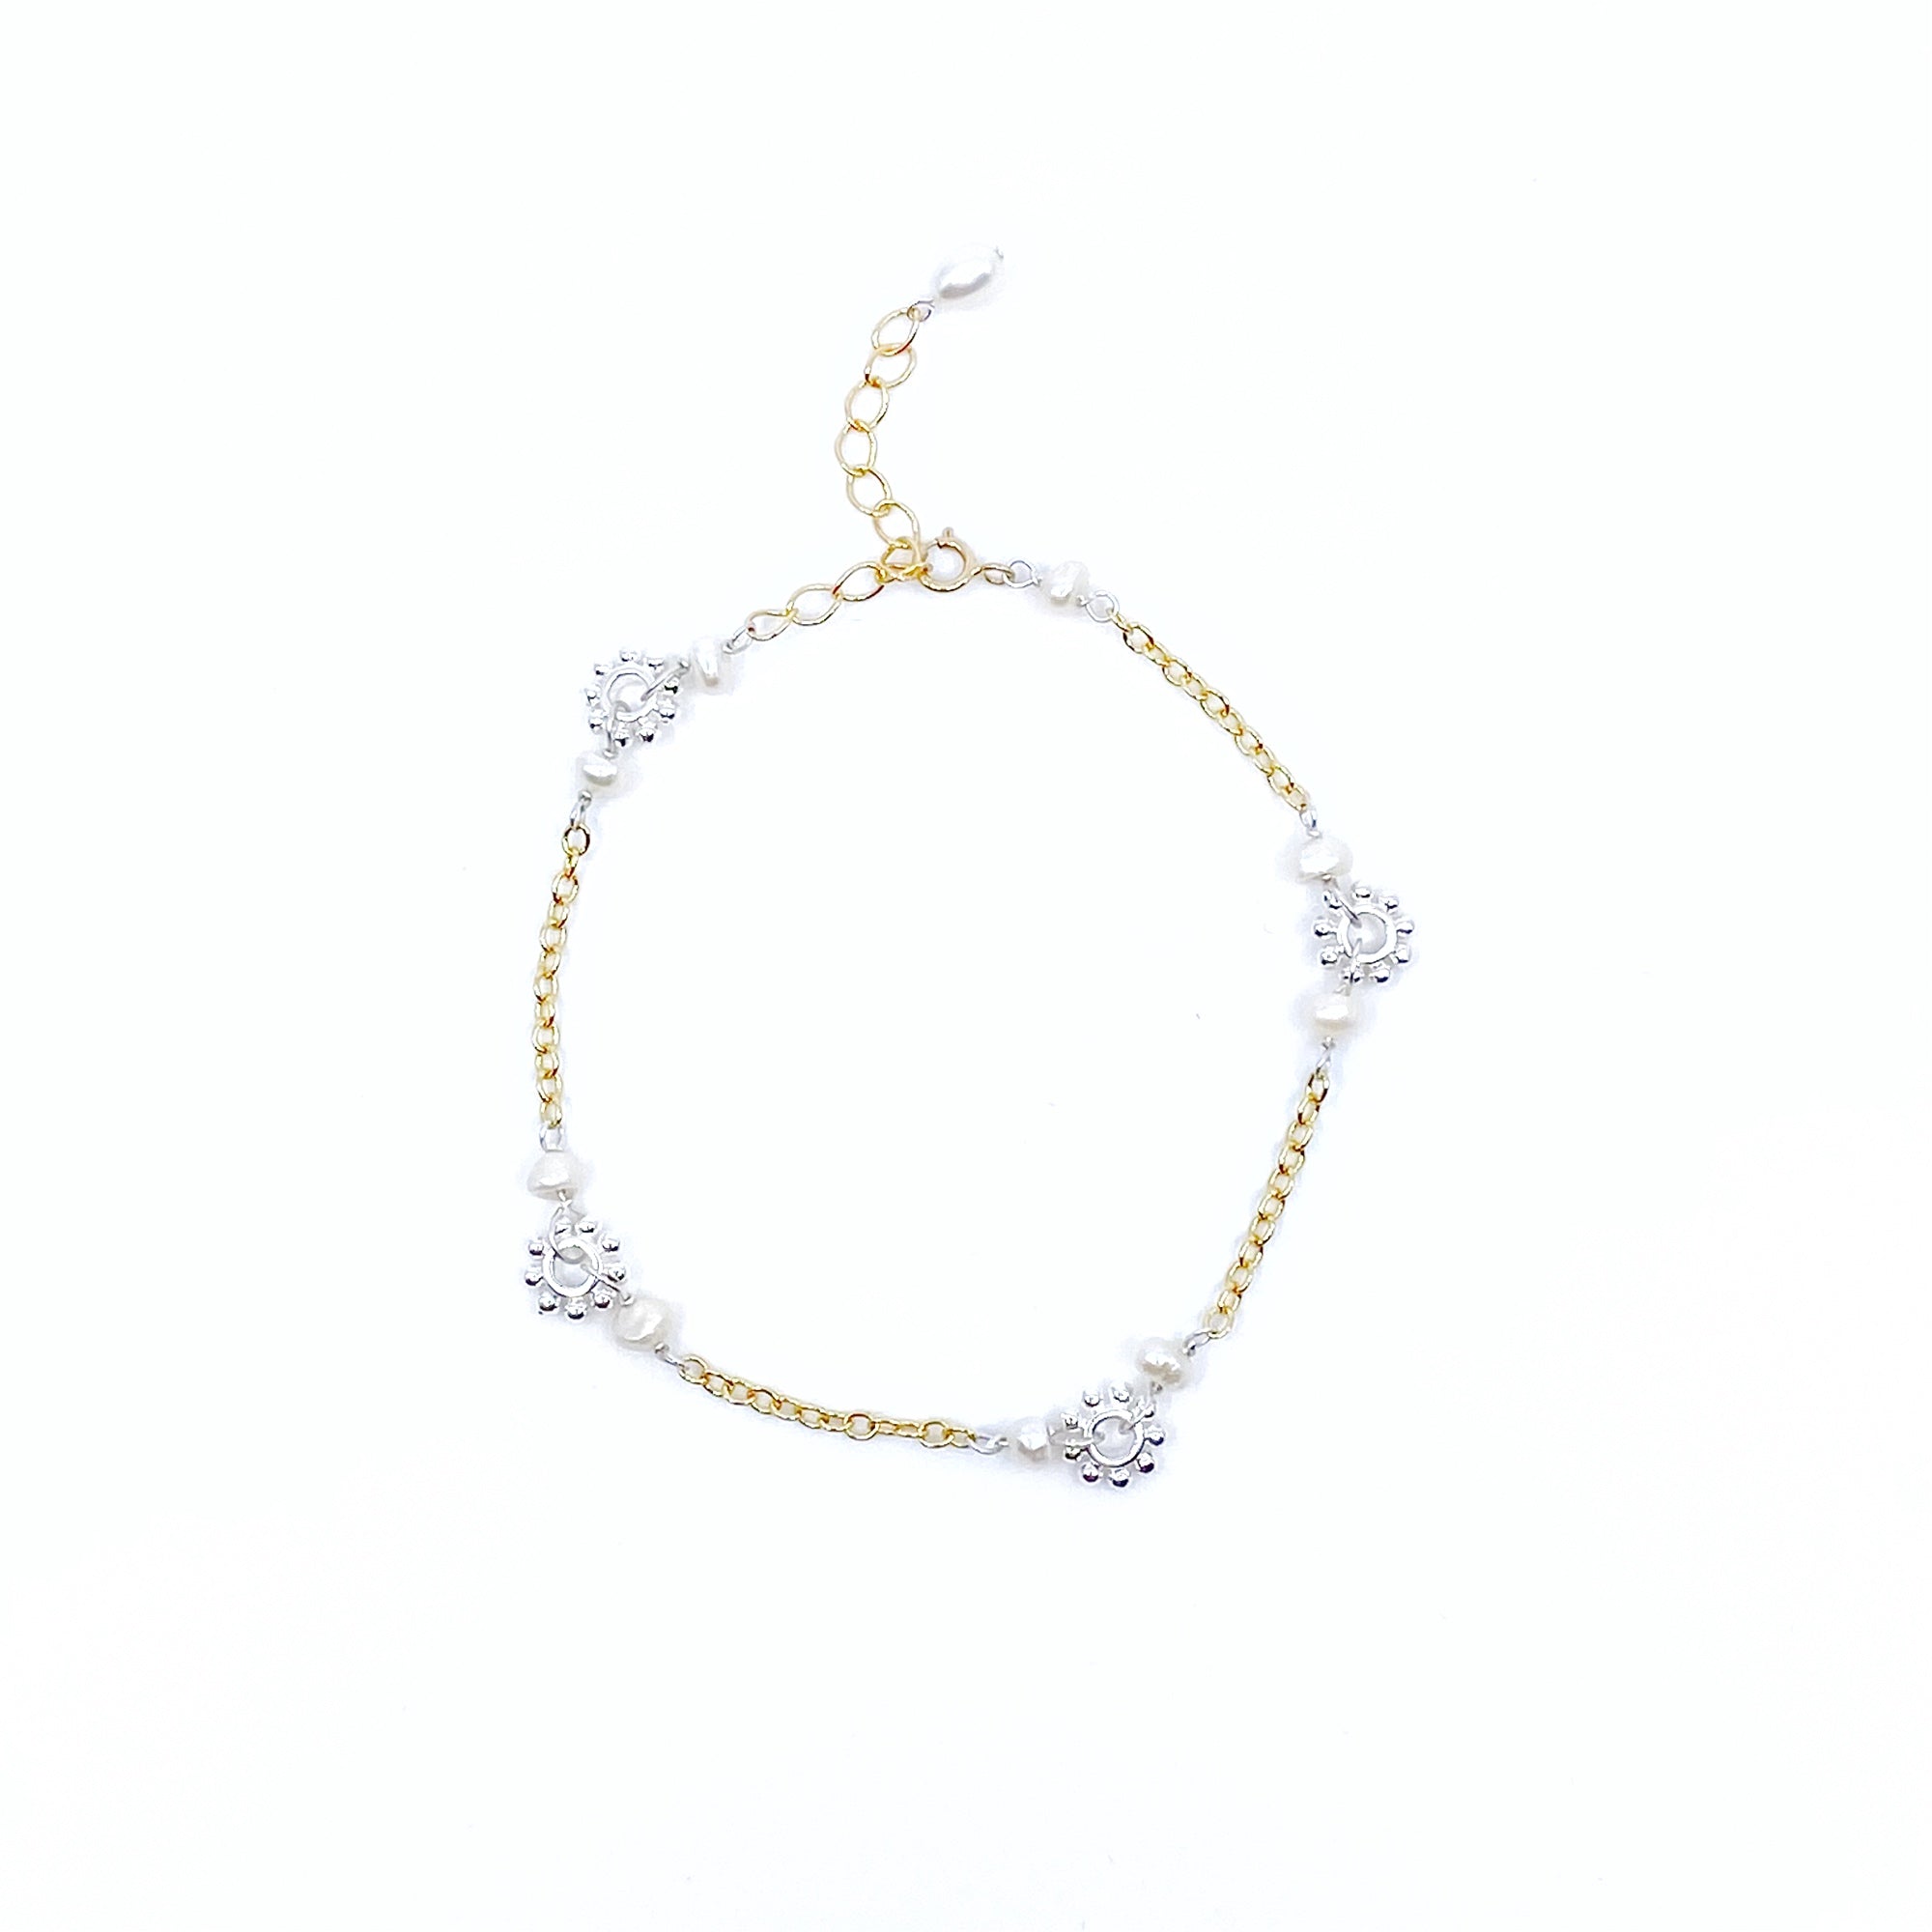 Gold and Silver Pearl Bracelet | Asian Boutique Jewelry from New York | Yun  Boutique